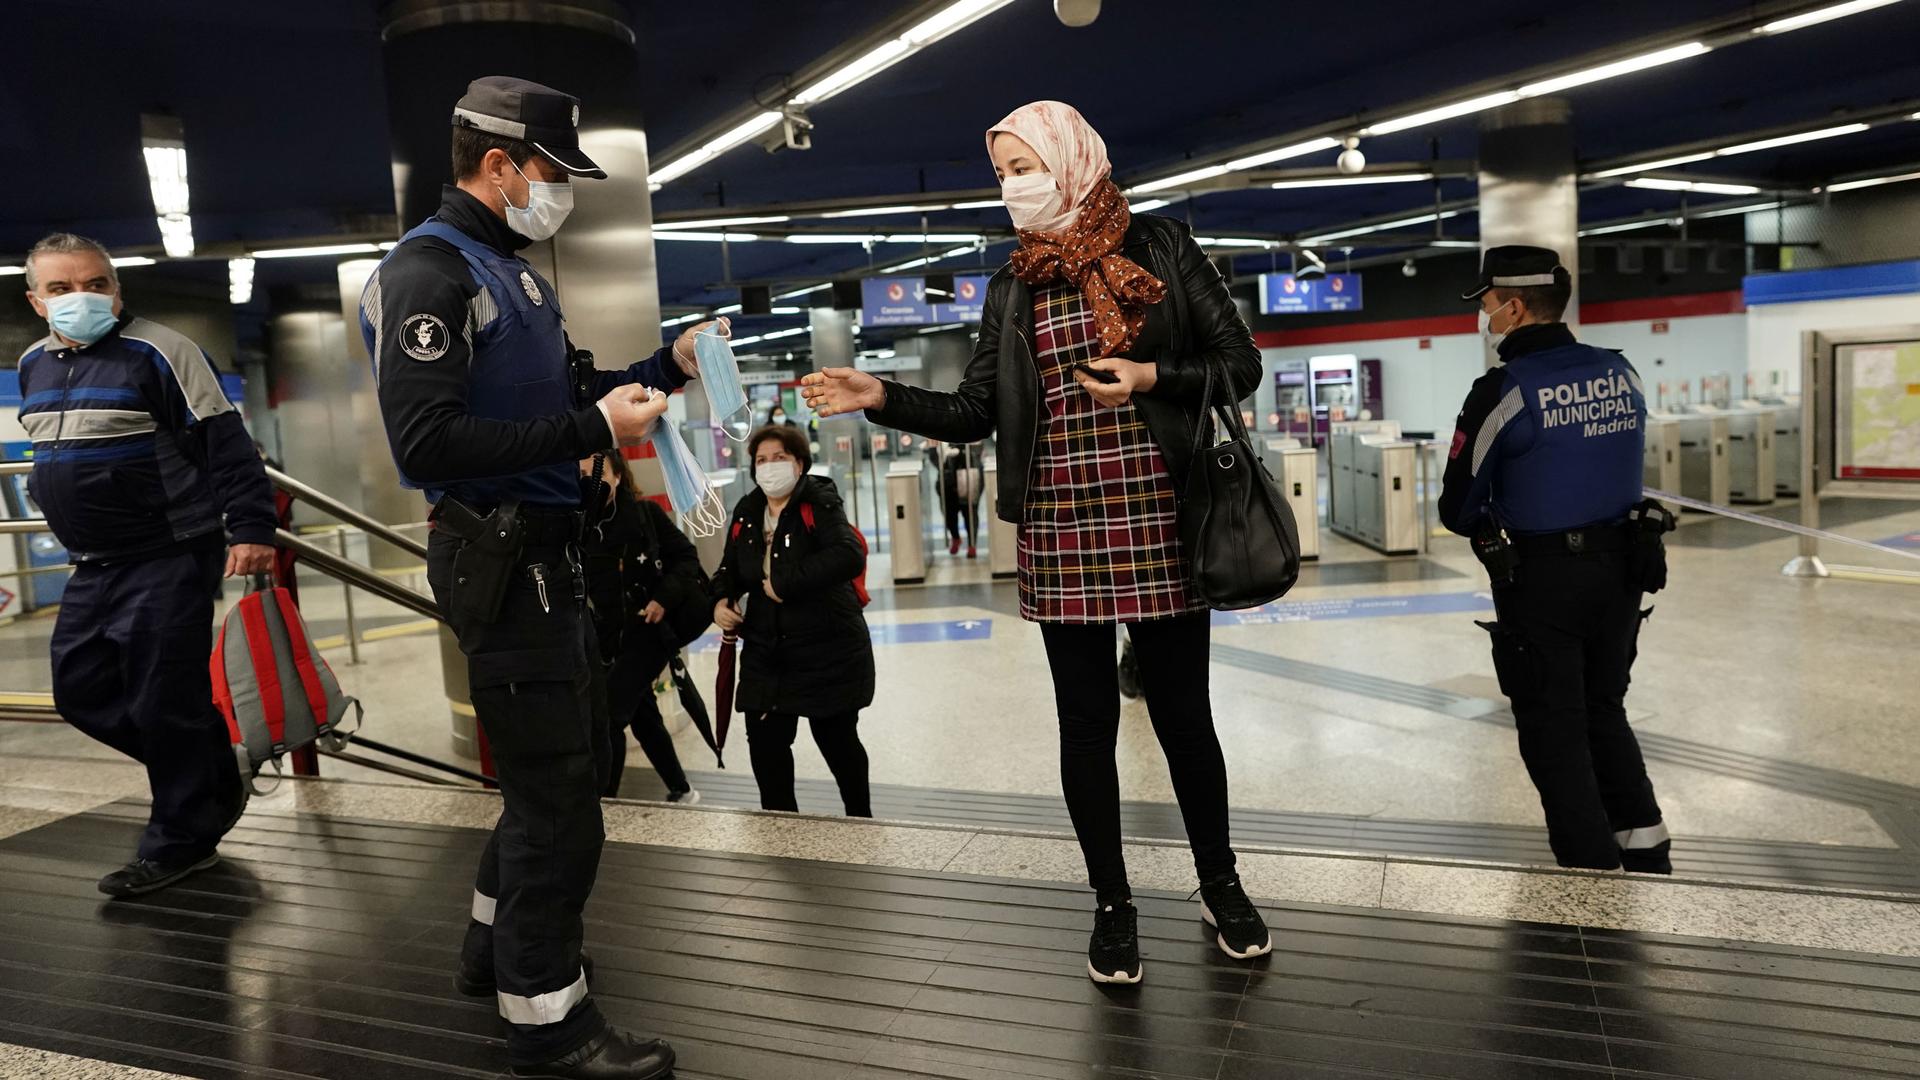 A police officer is shown holding several protective face masks and handing one out to a woman standing adjacent.